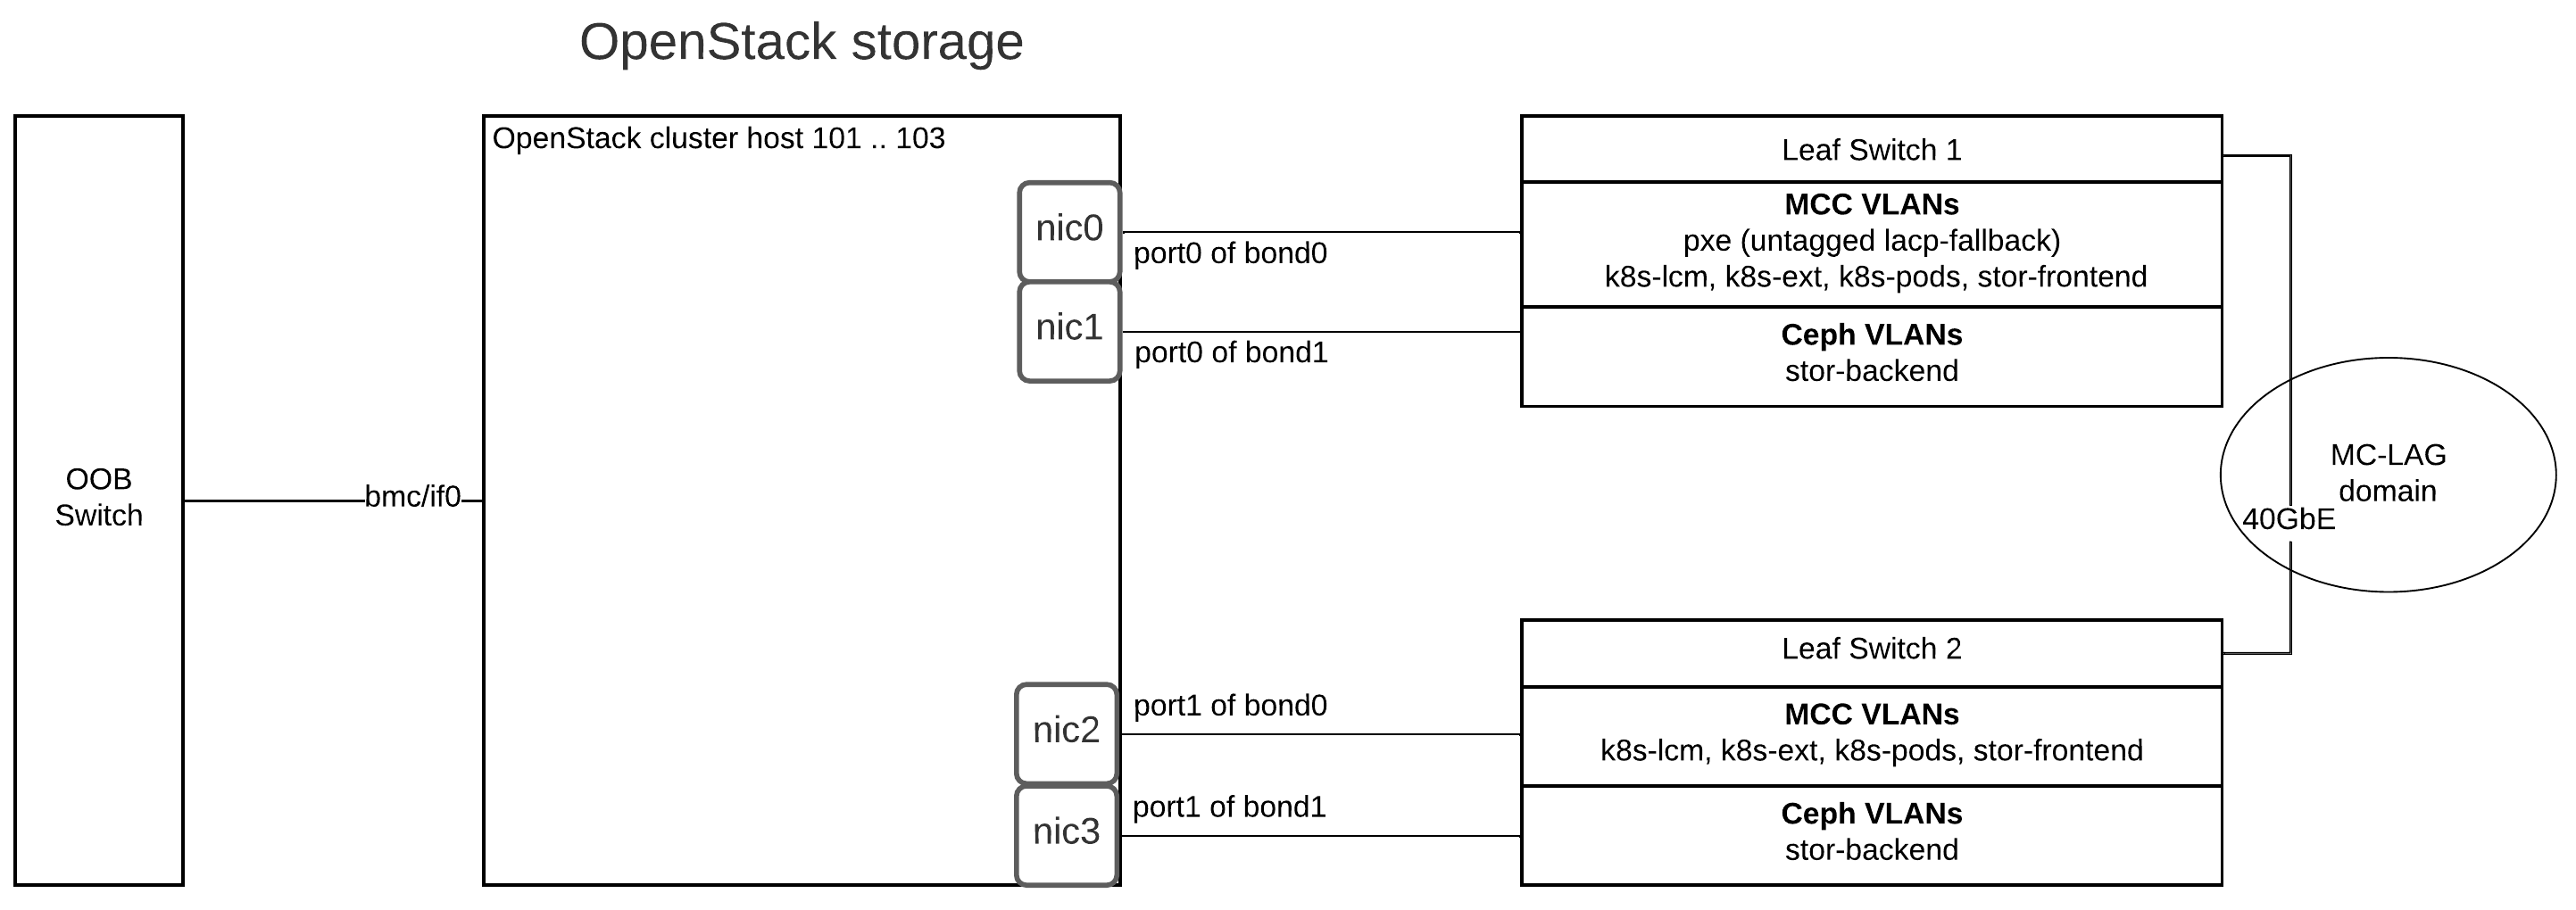 ../../_images/os-cluster-storage-physical.png